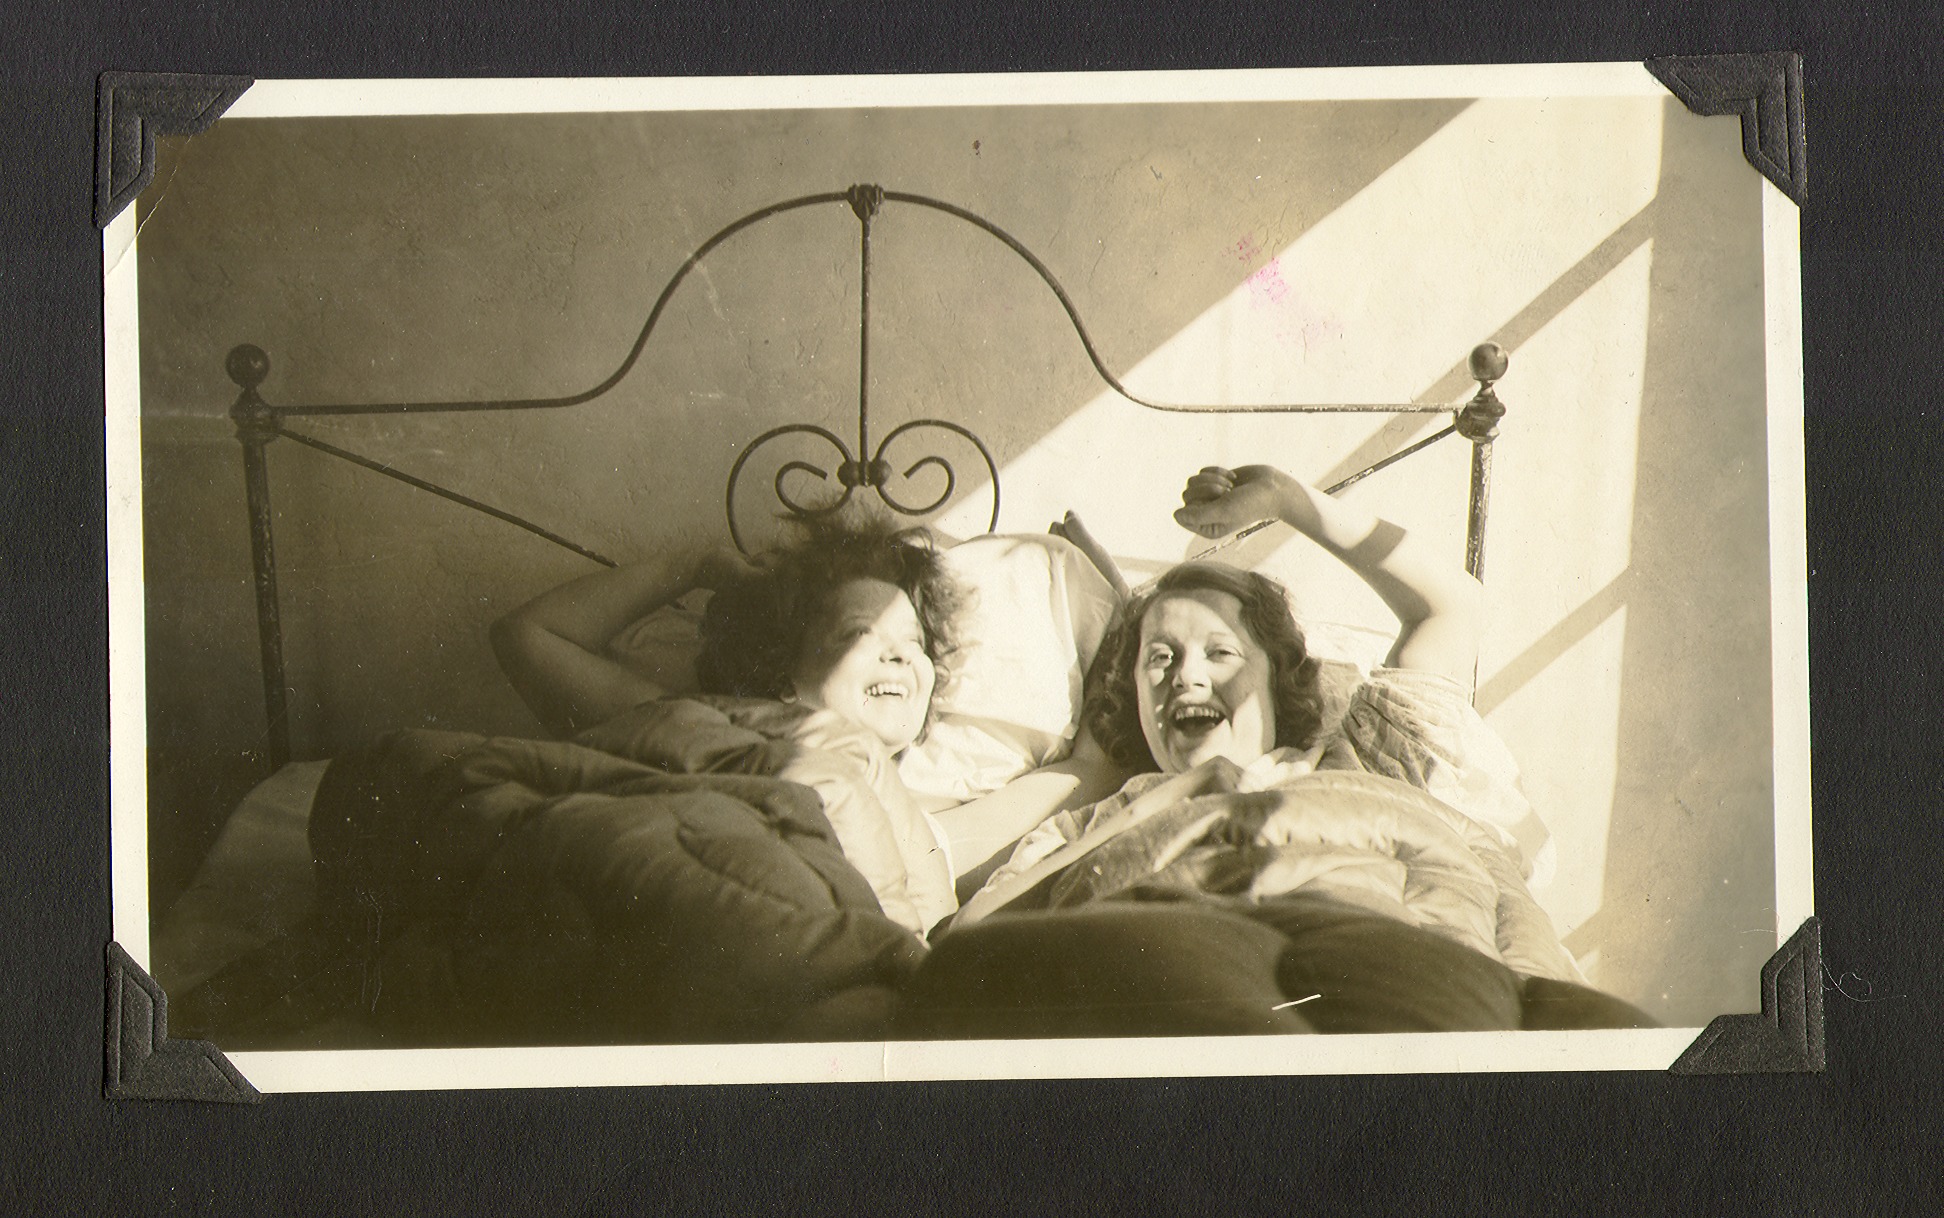 Clara Bow Bell and friend Marion Lewyn: photographic print